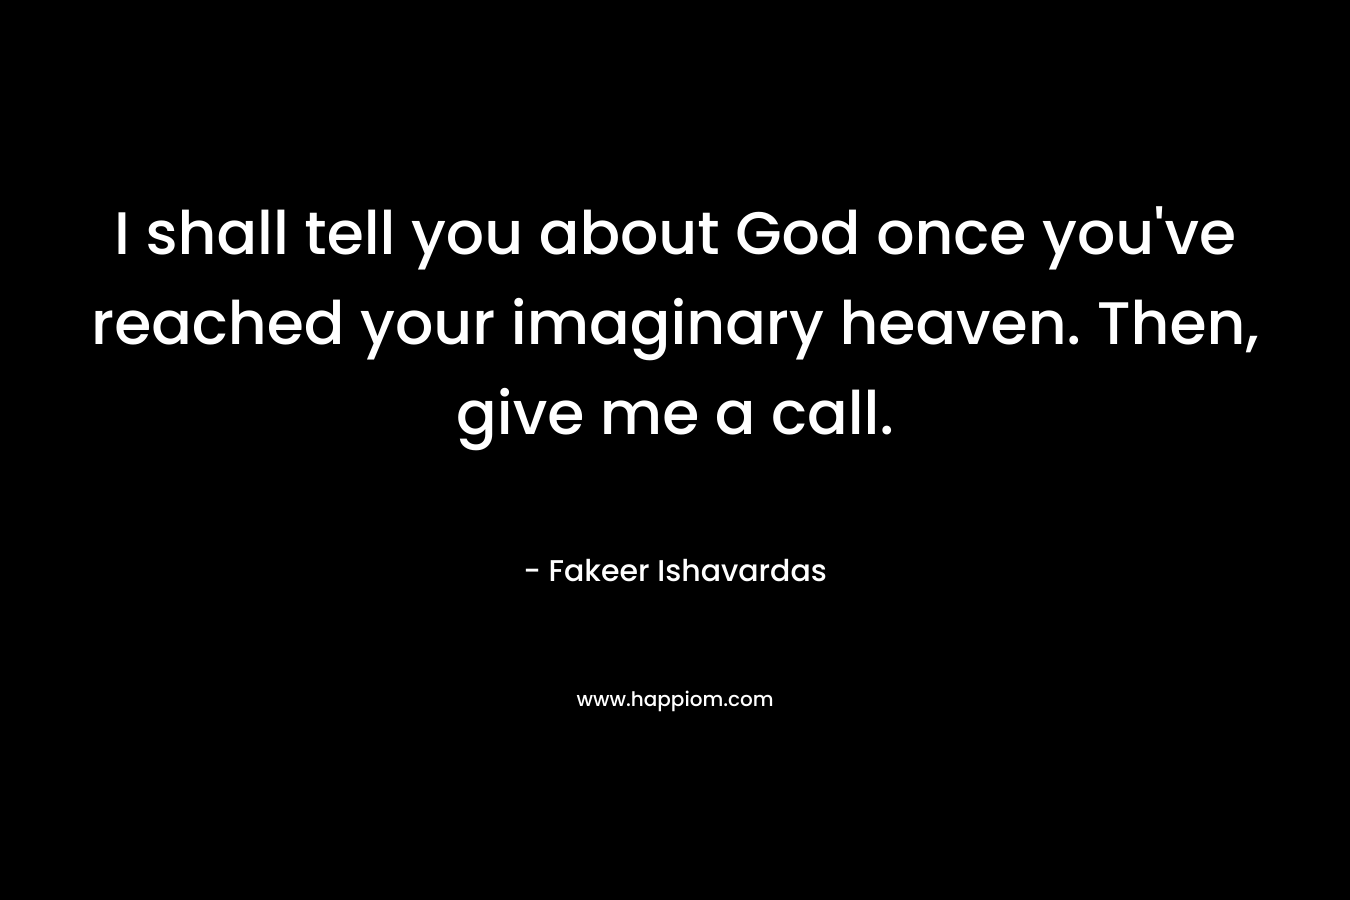 I shall tell you about God once you’ve reached your imaginary heaven. Then, give me a call. – Fakeer Ishavardas